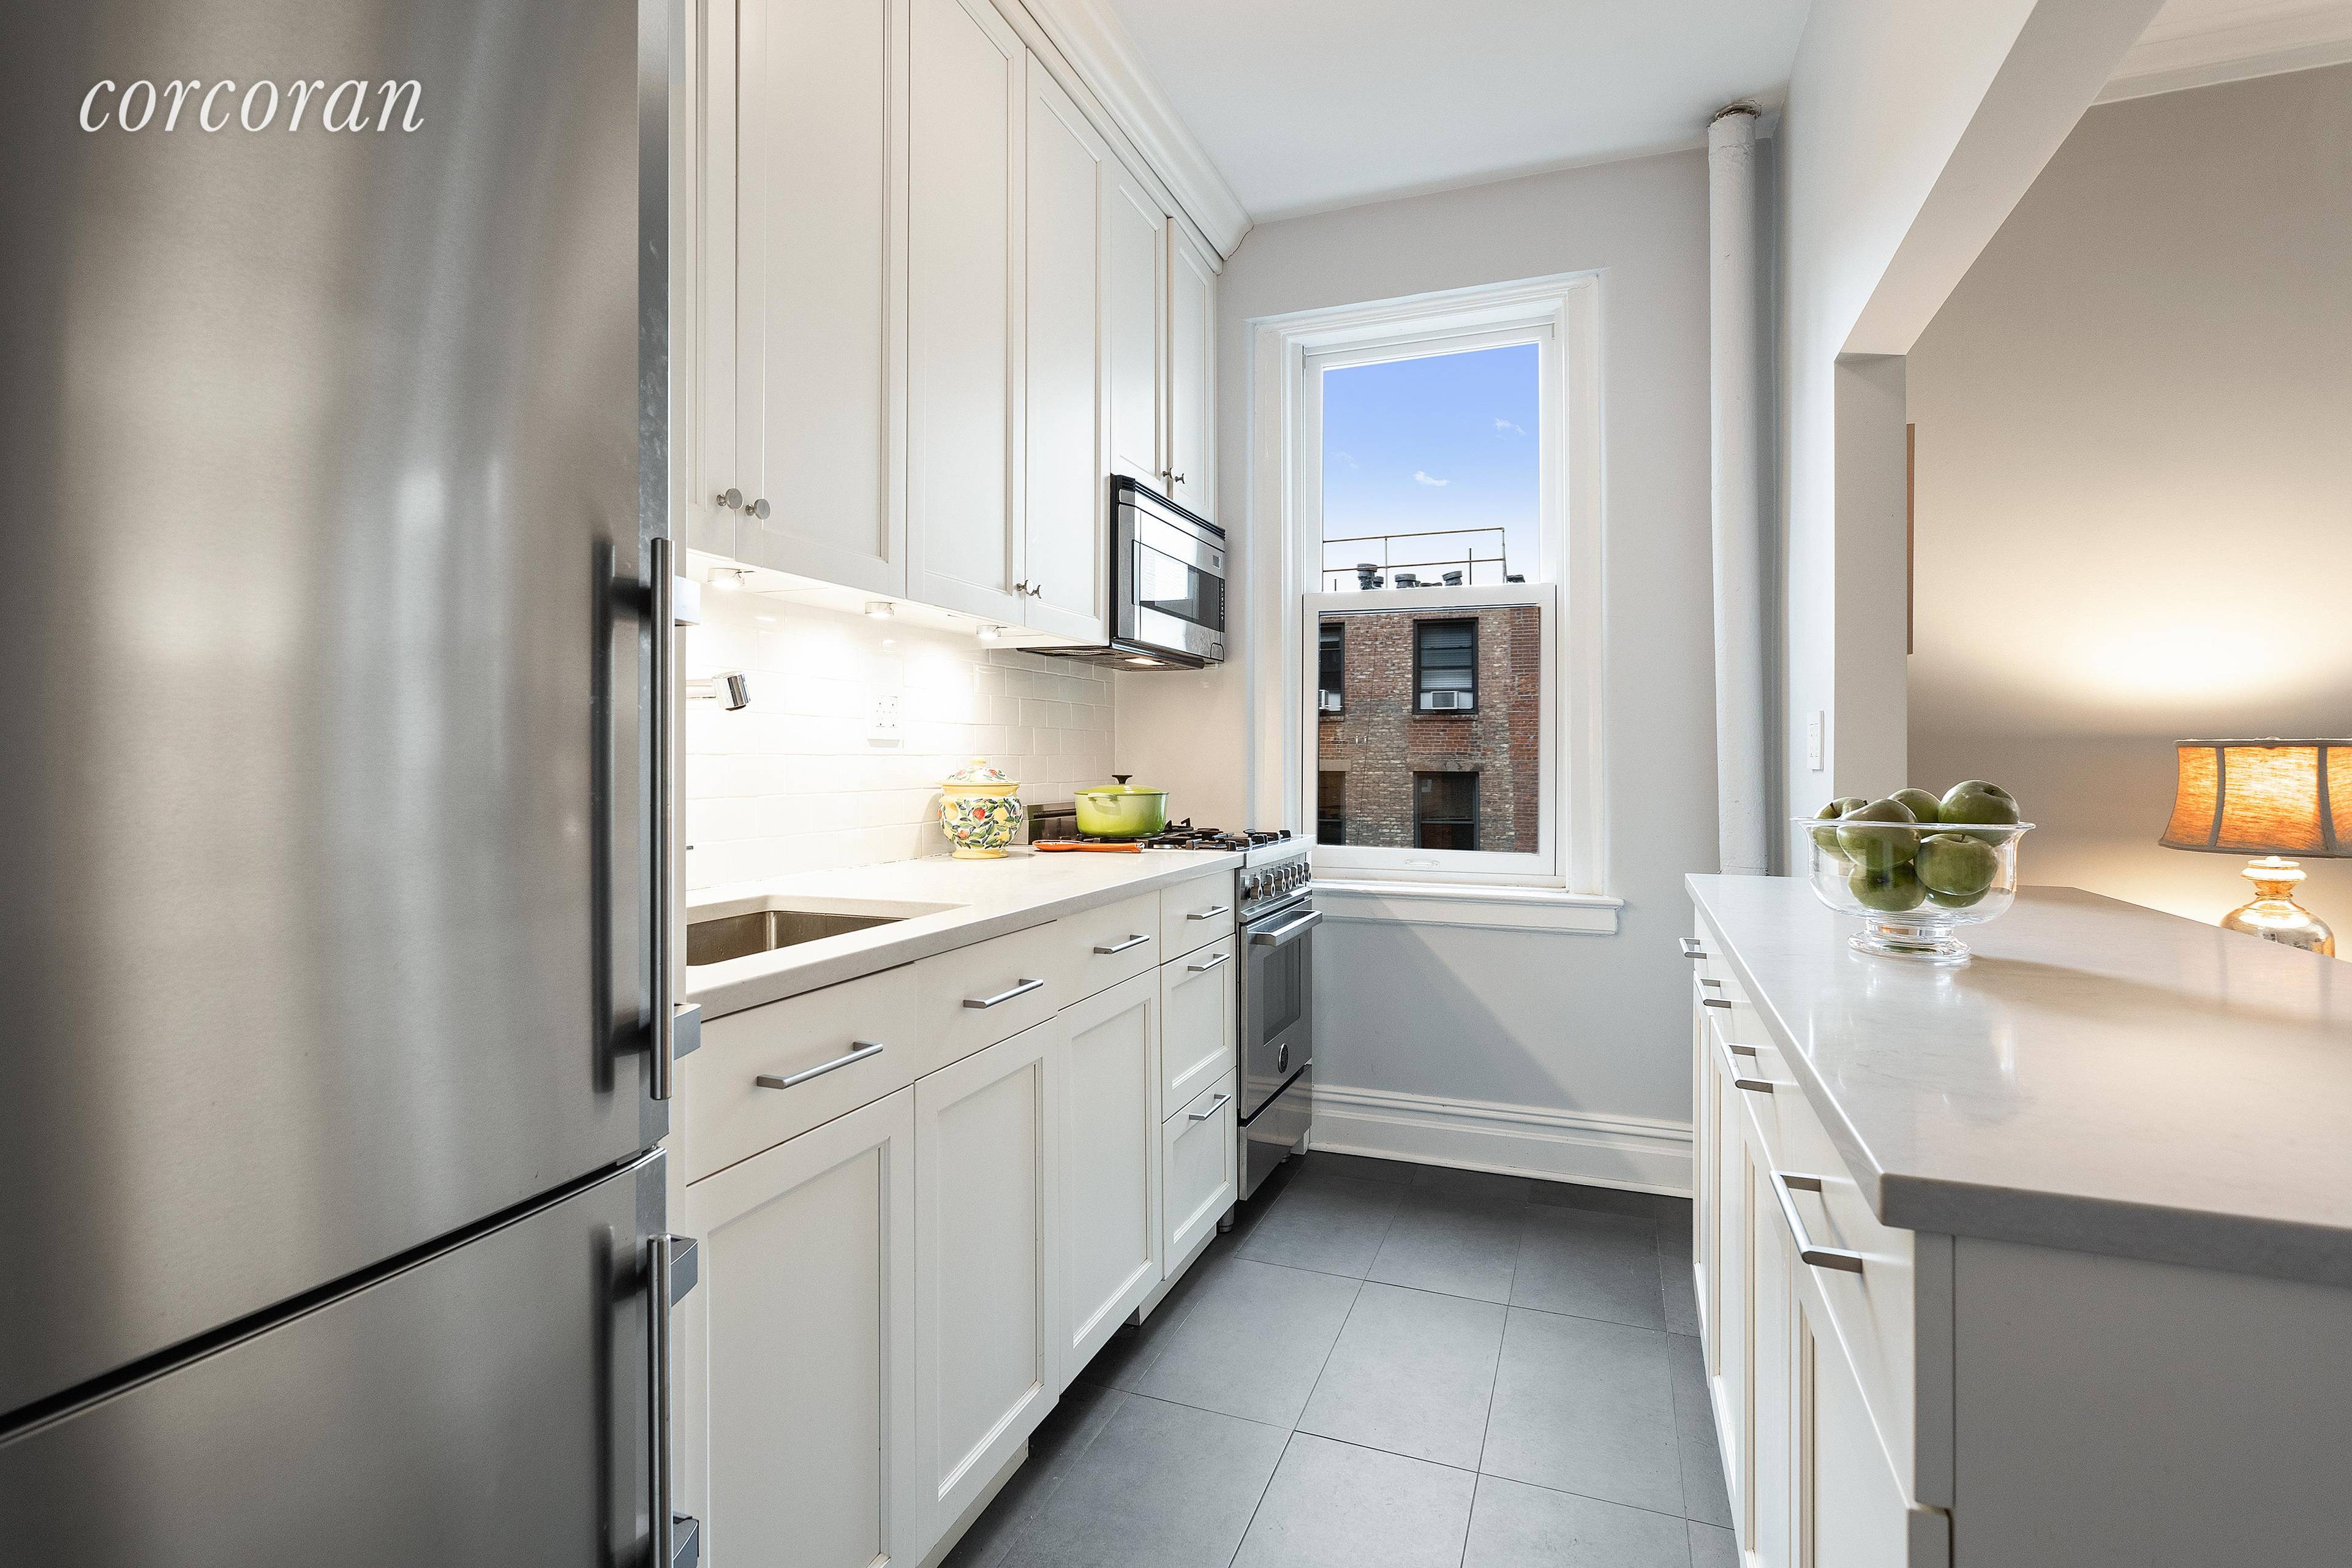 PREWAR BEAUTY ! This lovely home has been exquisitely renovated and couldnt be prettier.